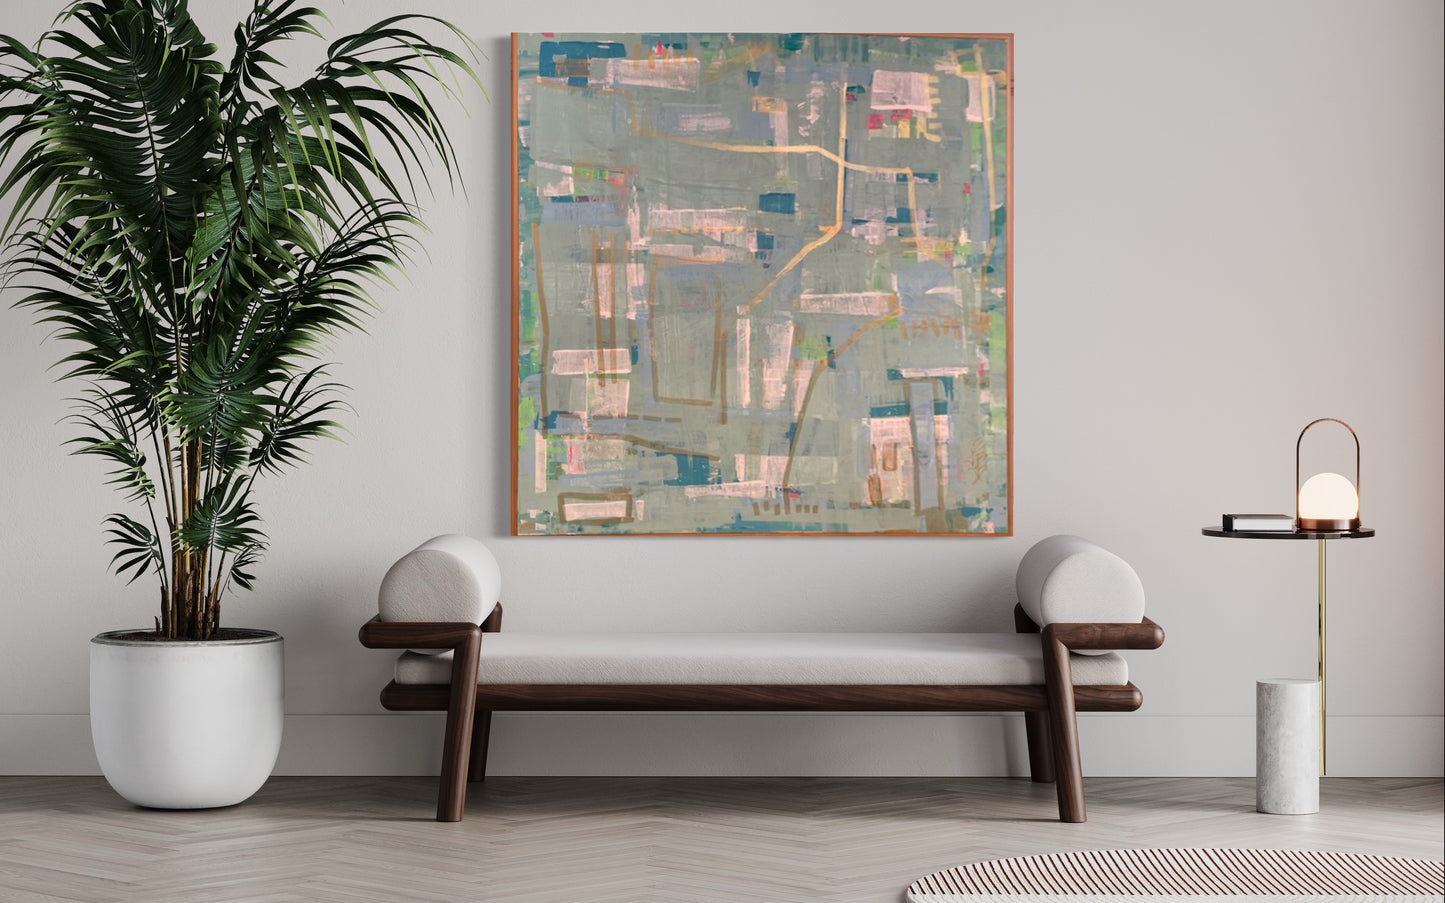 48x48 Intersections abstract with blues, gold/pink/green highlights